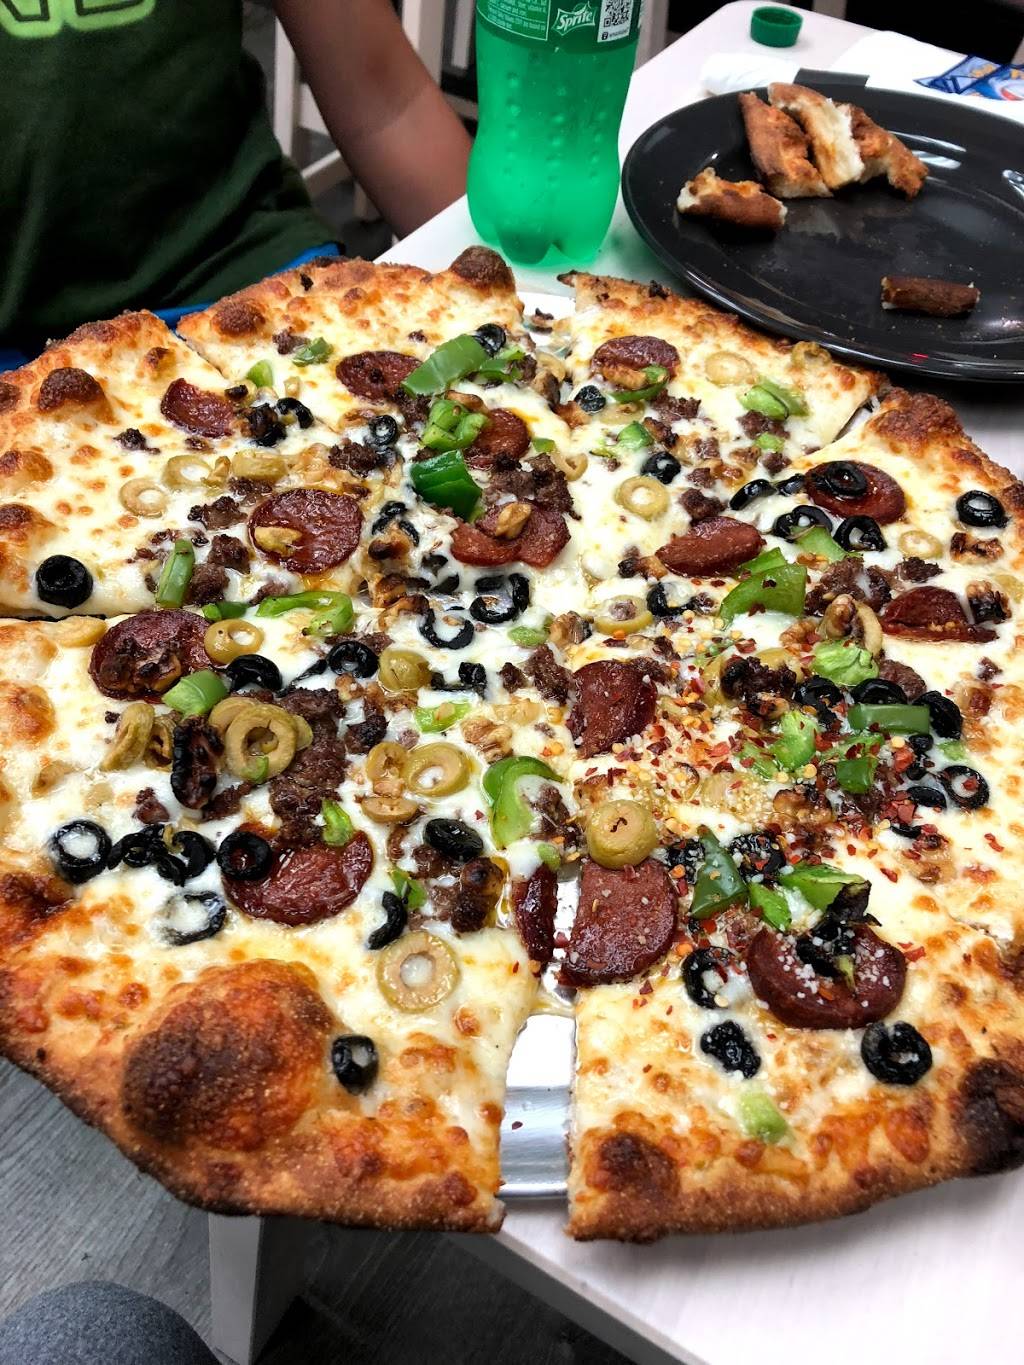 Pizza Tiempo | restaurant | 8021 Wisconsin Ave, Bethesda, MD 20814, USA | 3019130606 OR +1 301-913-0606